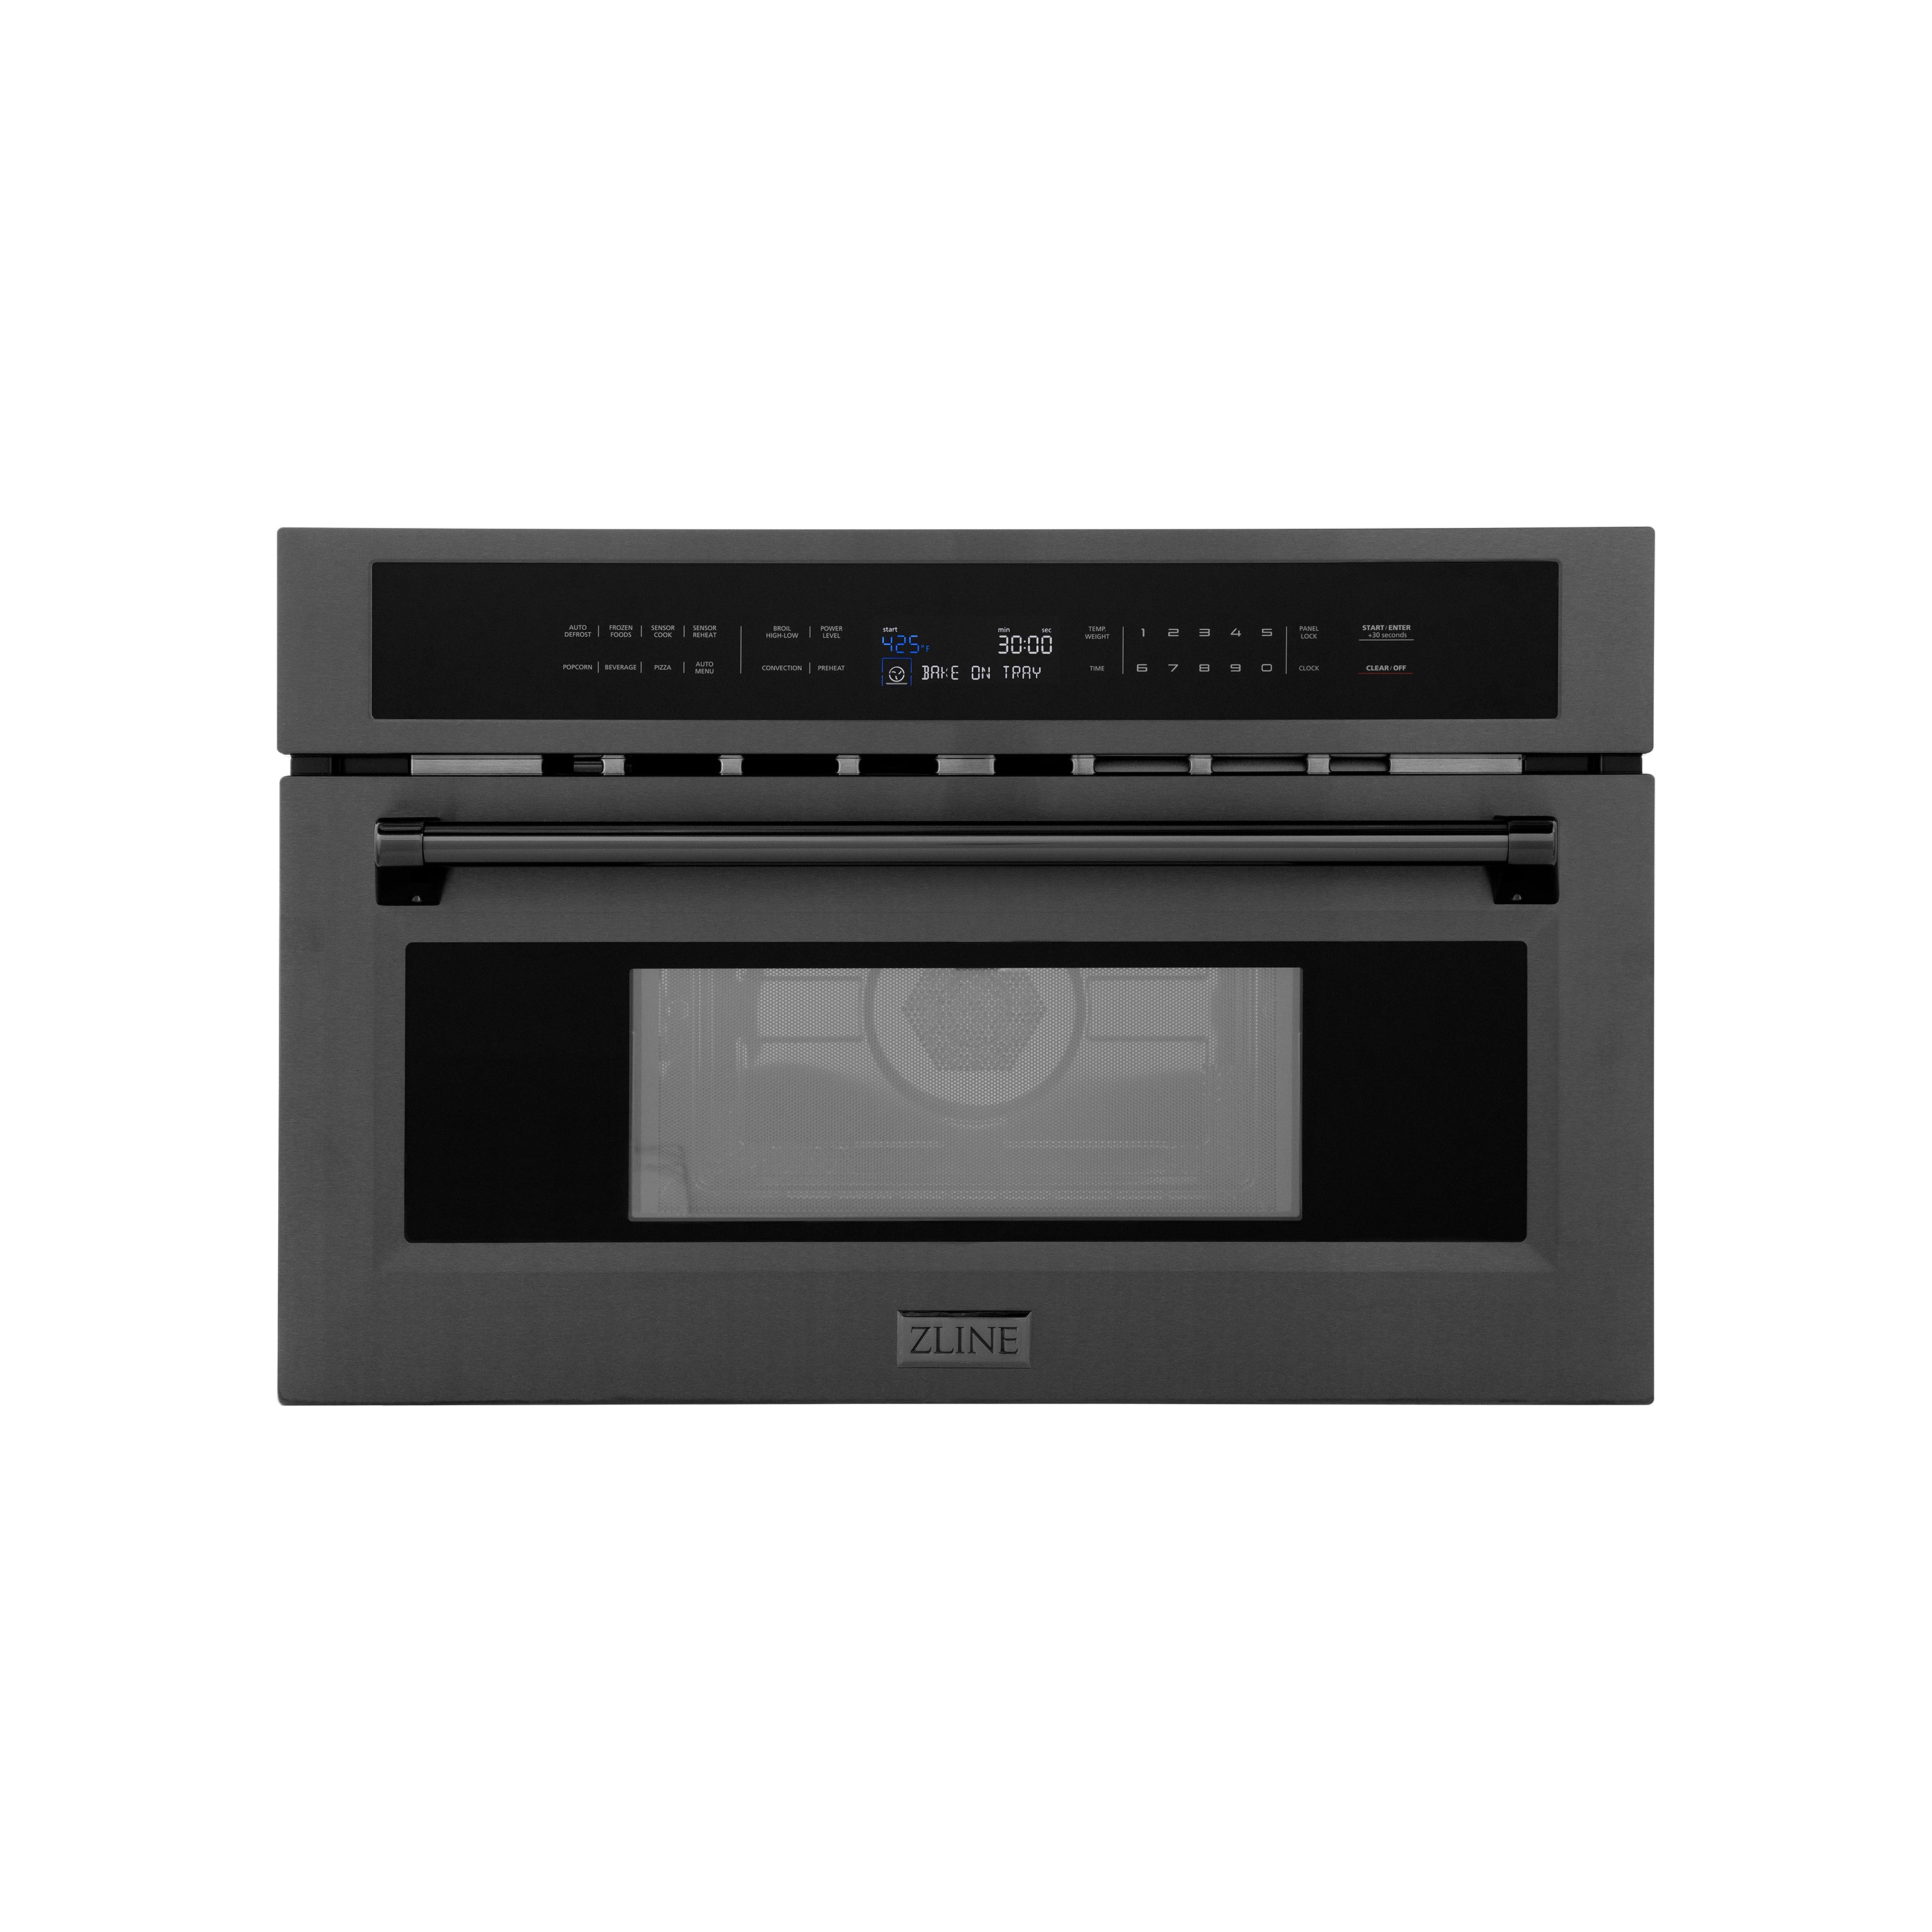 ZLINE 30” 1.6 cu ft. Built-in Convection Microwave Oven in Black Stainless Steel with Speed and Sensor Cooking